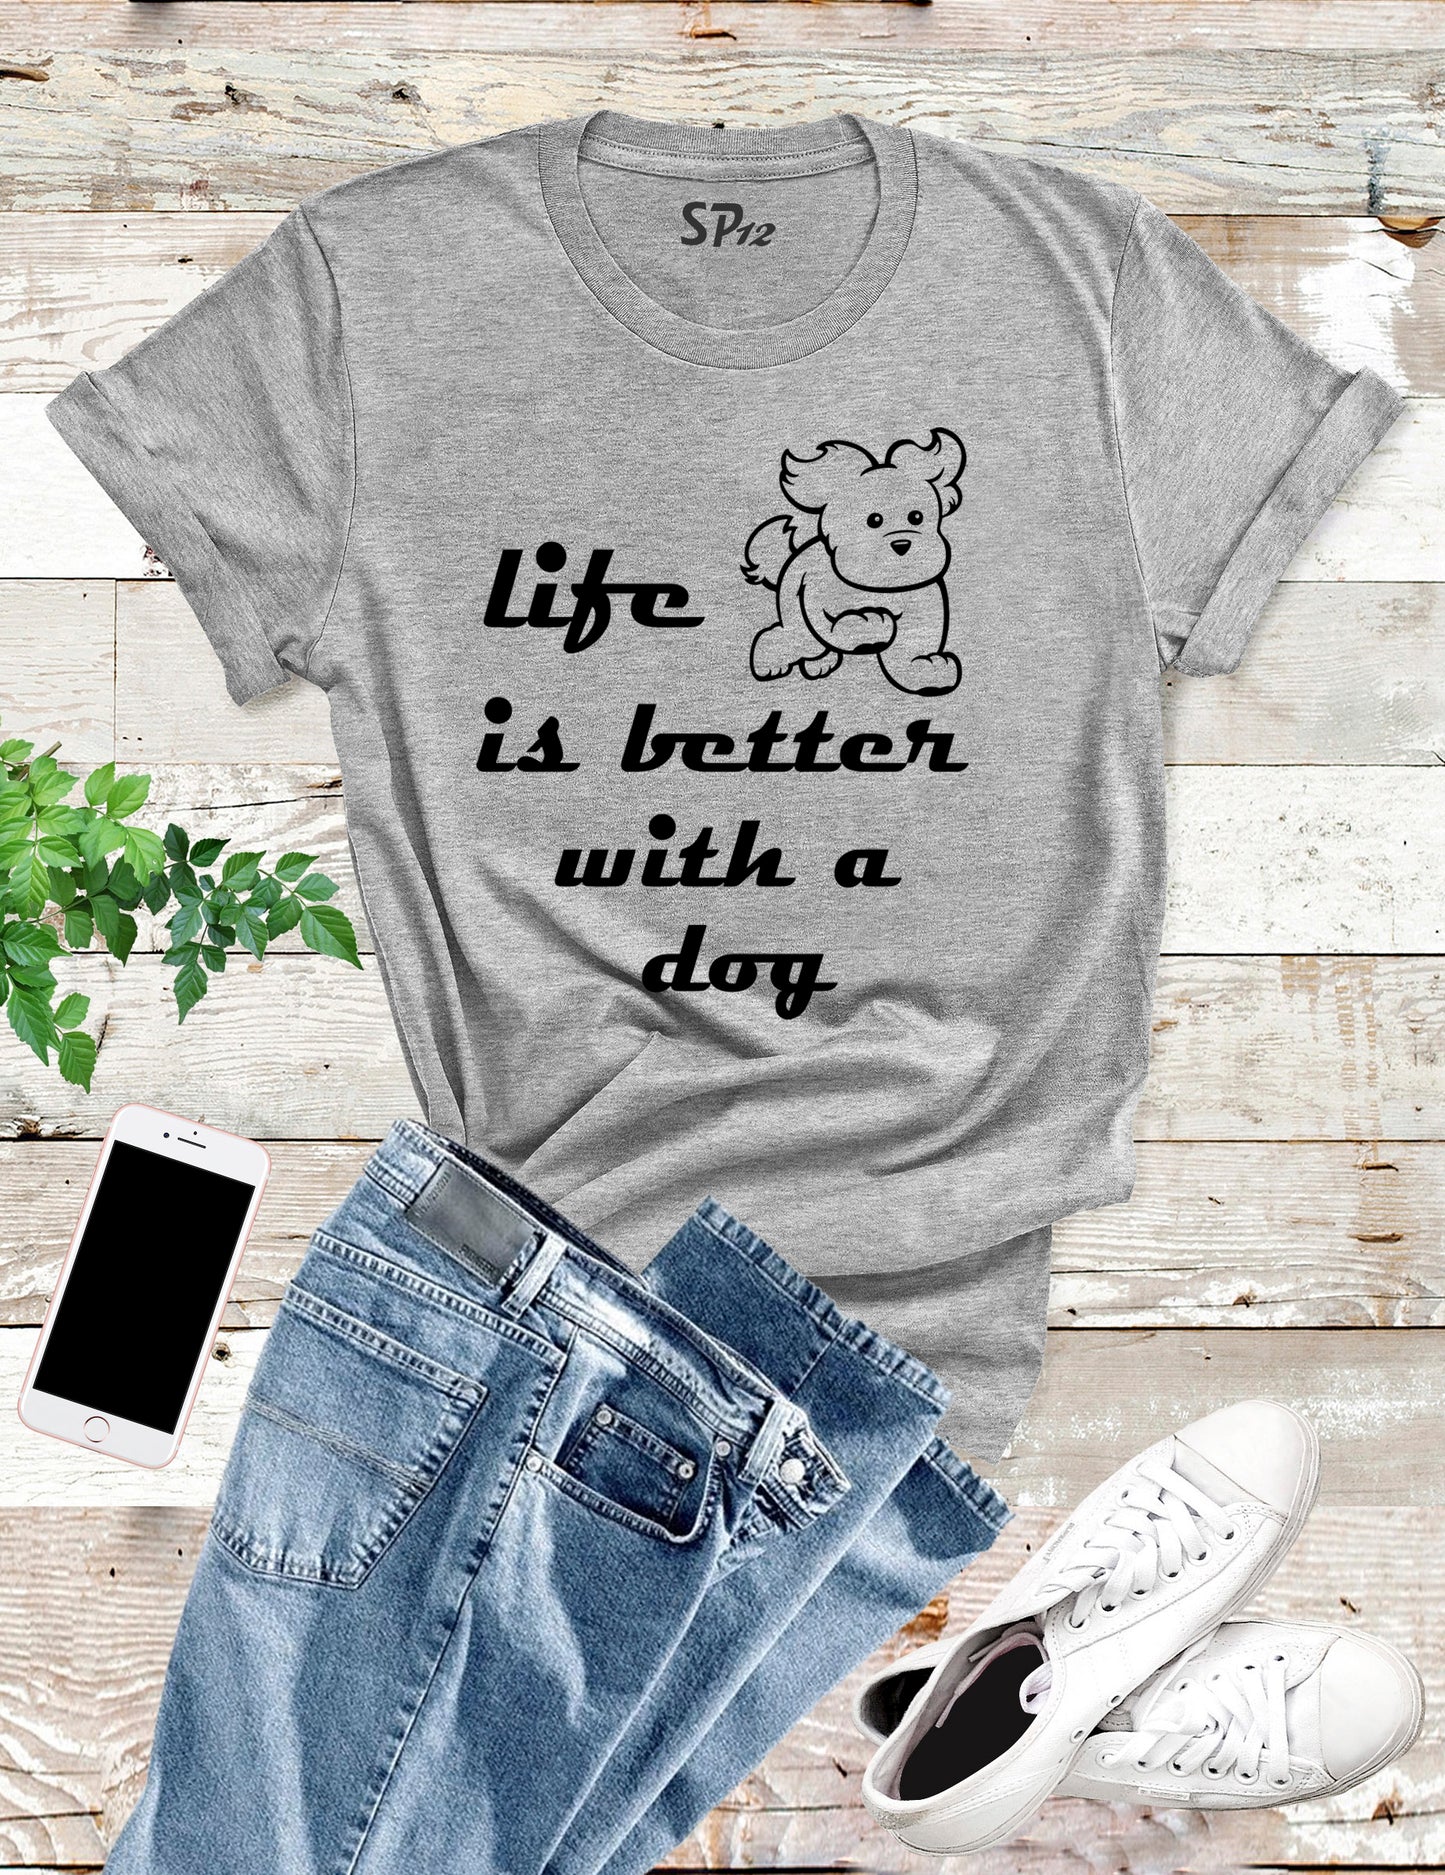 Animal Slogan T Shirt Life is Better with a dog